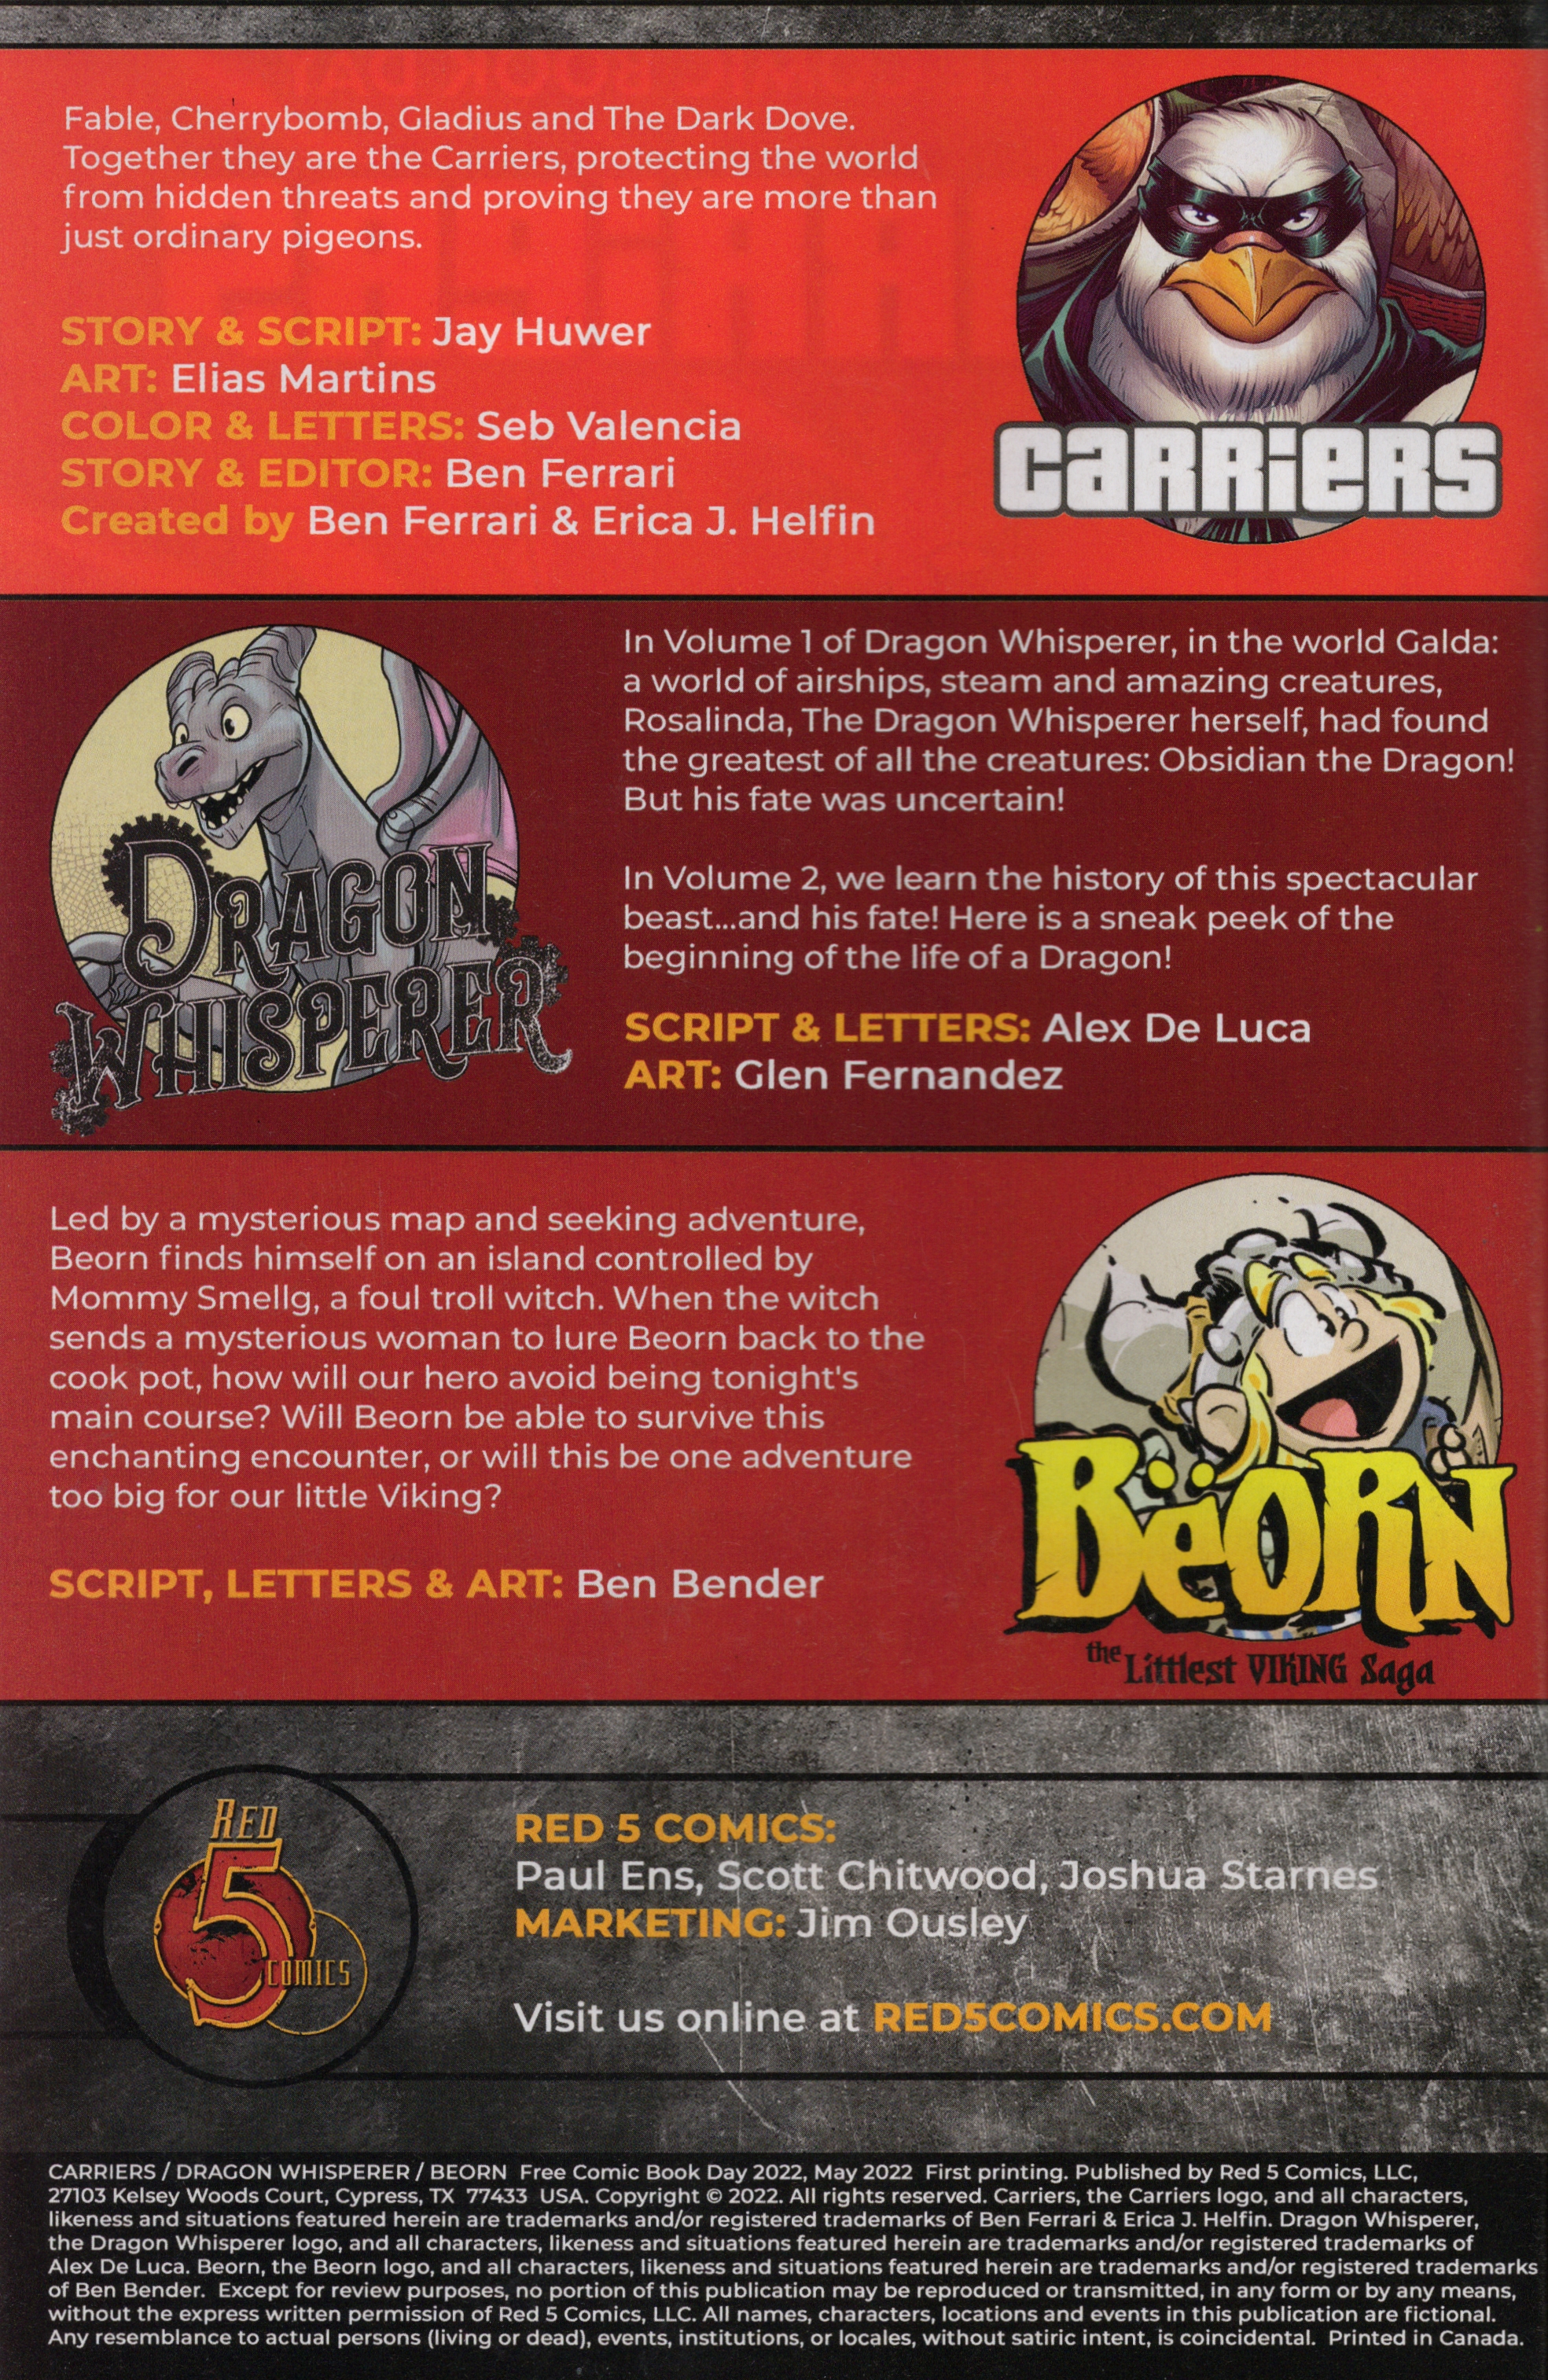 Read online Free Comic Book Day 2022 comic -  Issue # 5 Red Comics Carriers, Beorn and Dragon Whisperer - 2